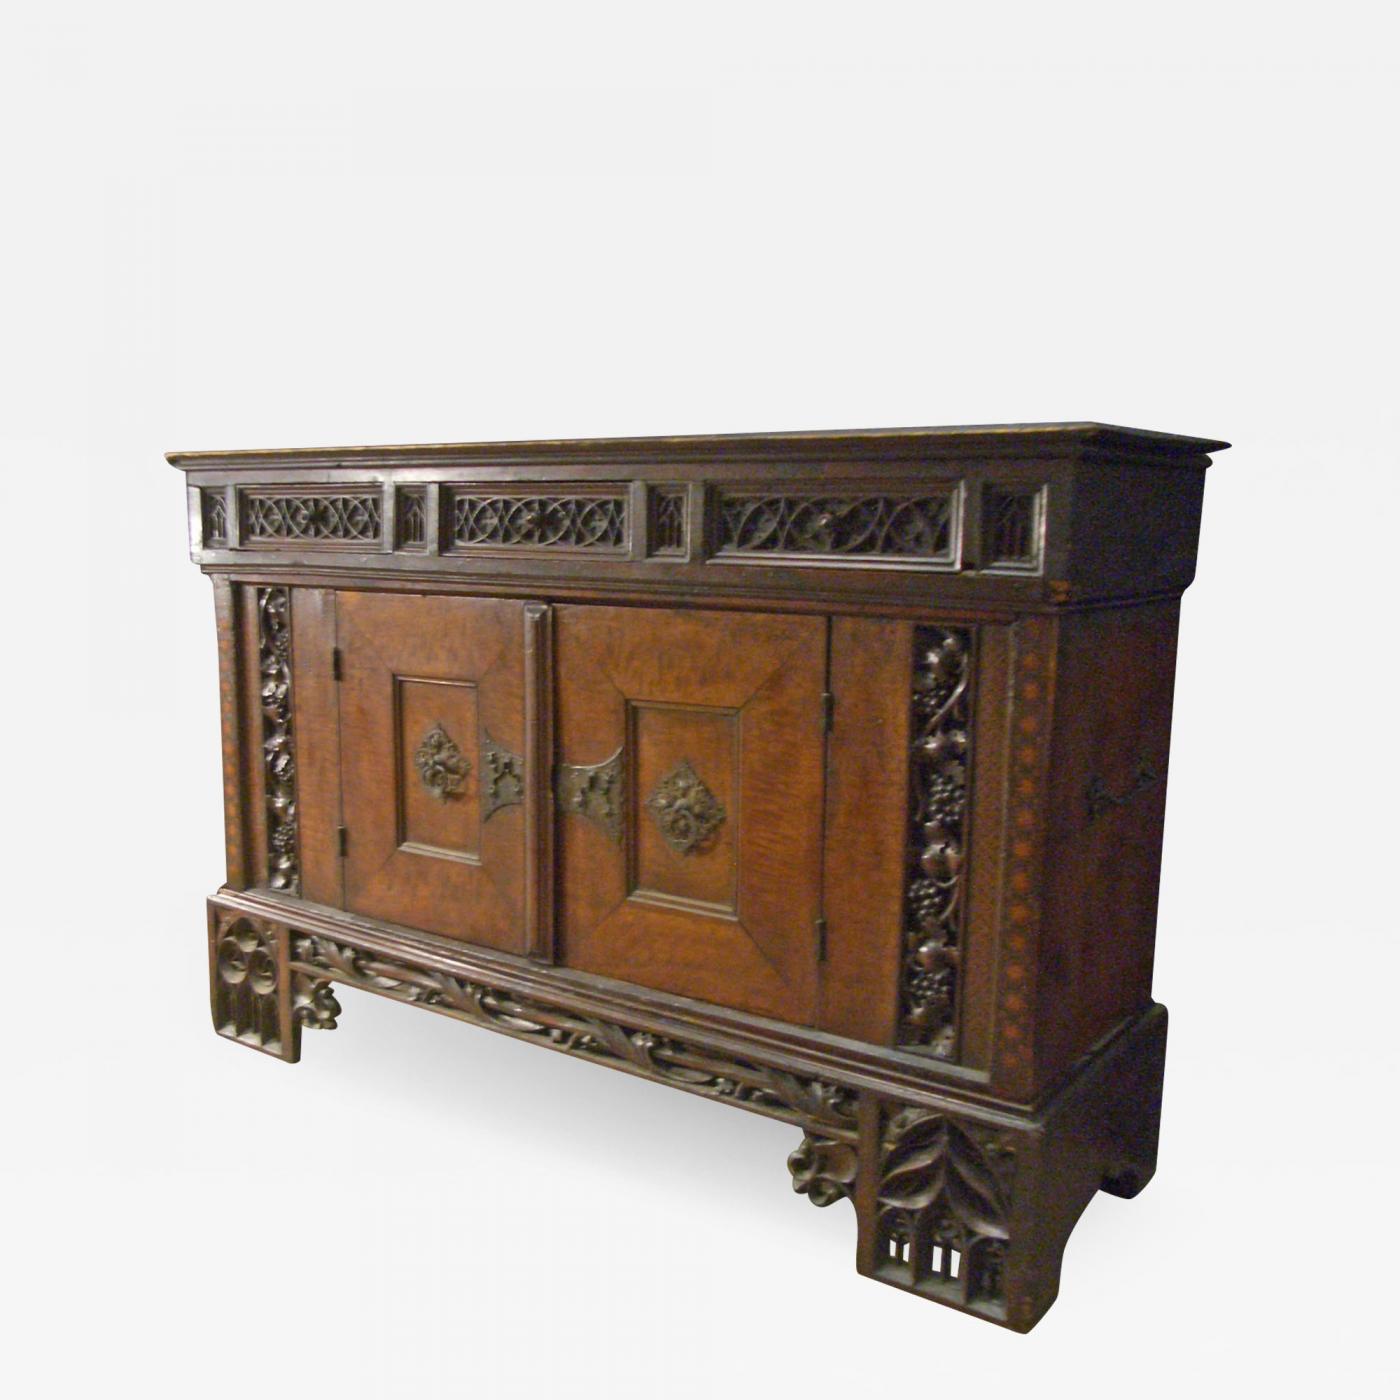 Early 16. Готика 13 век мебель. Sideboard Cabinet.